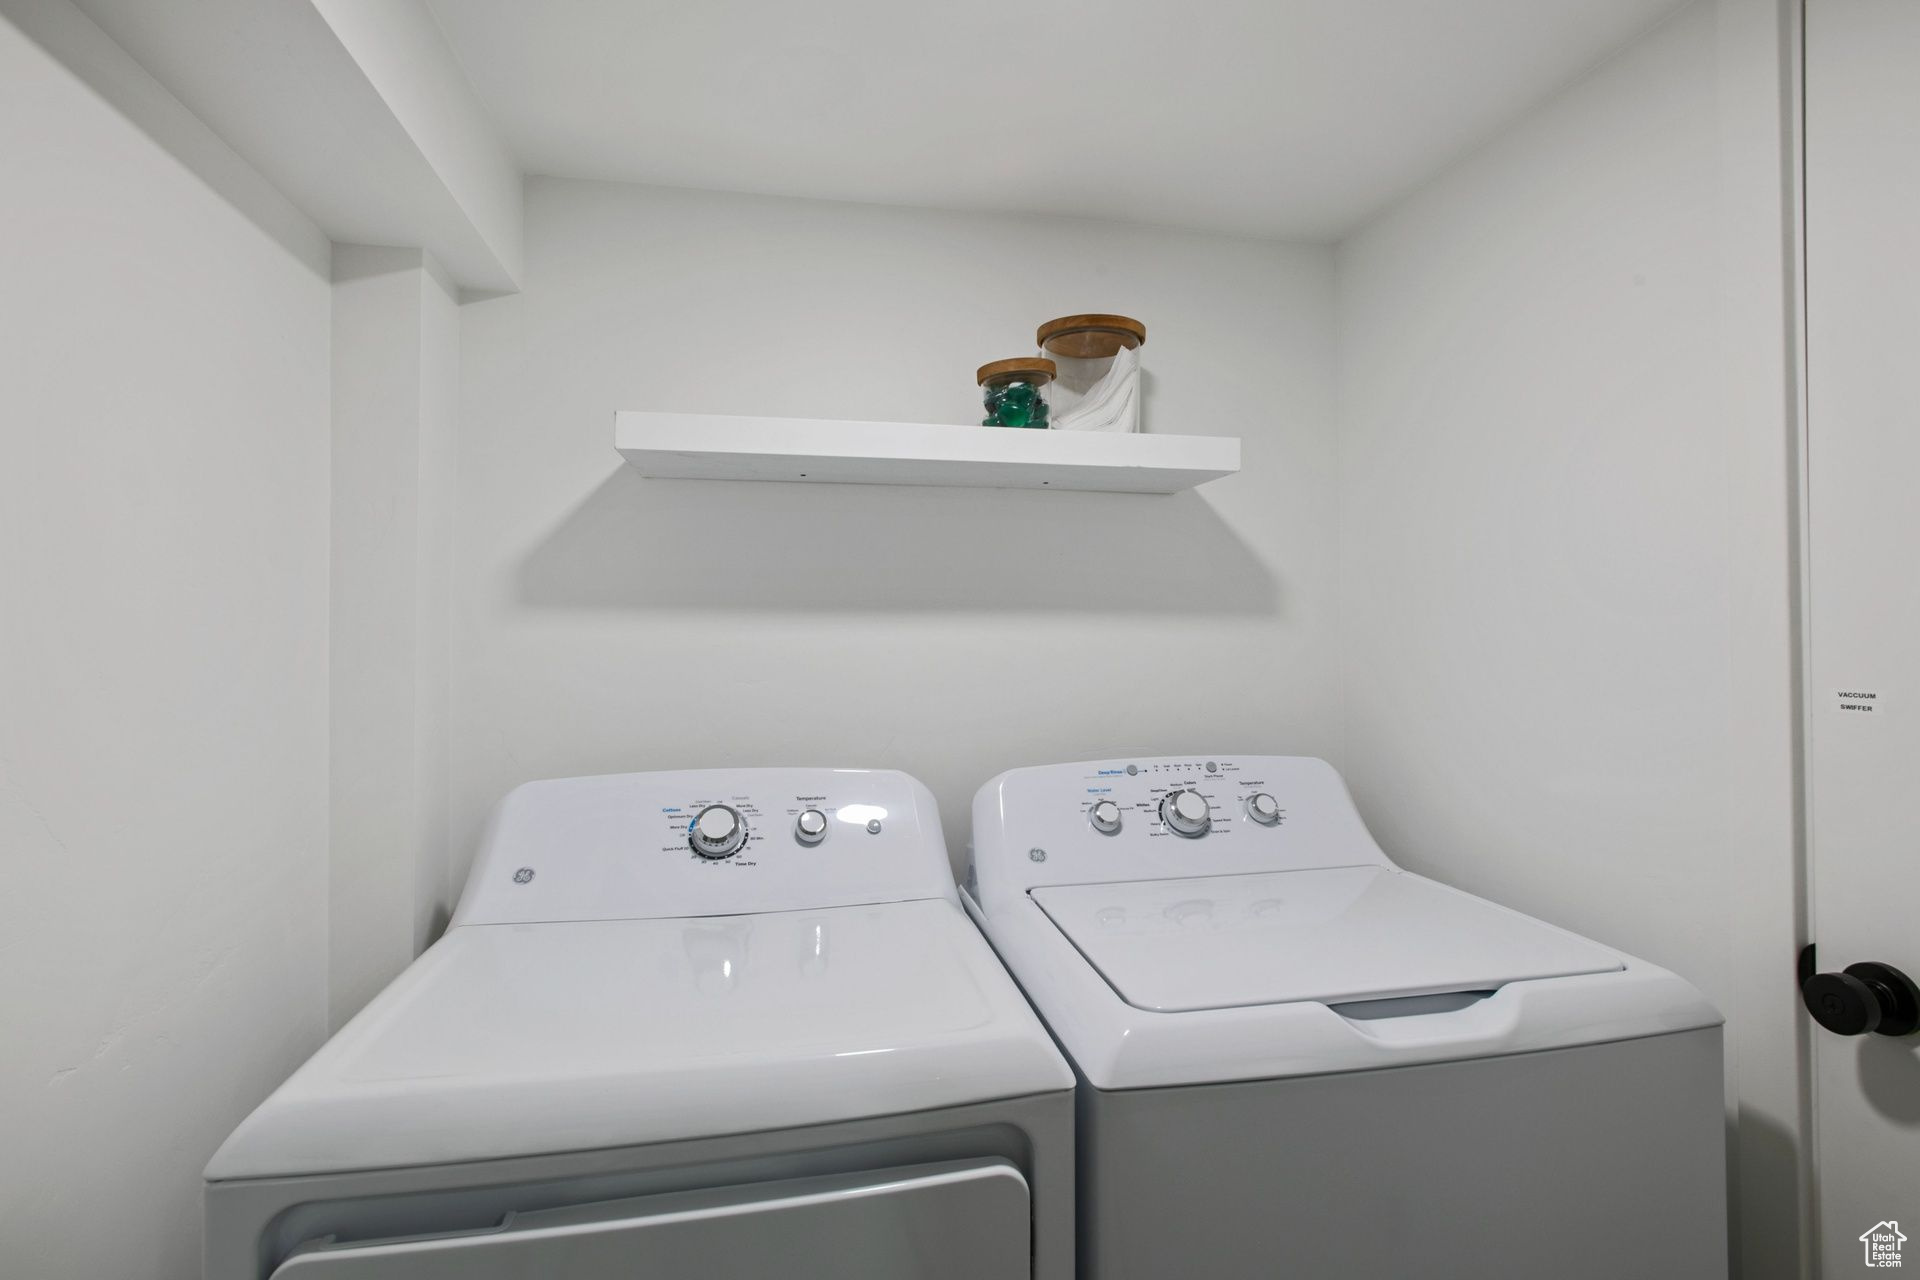 Laundry area featuring washing machine and clothes dryer